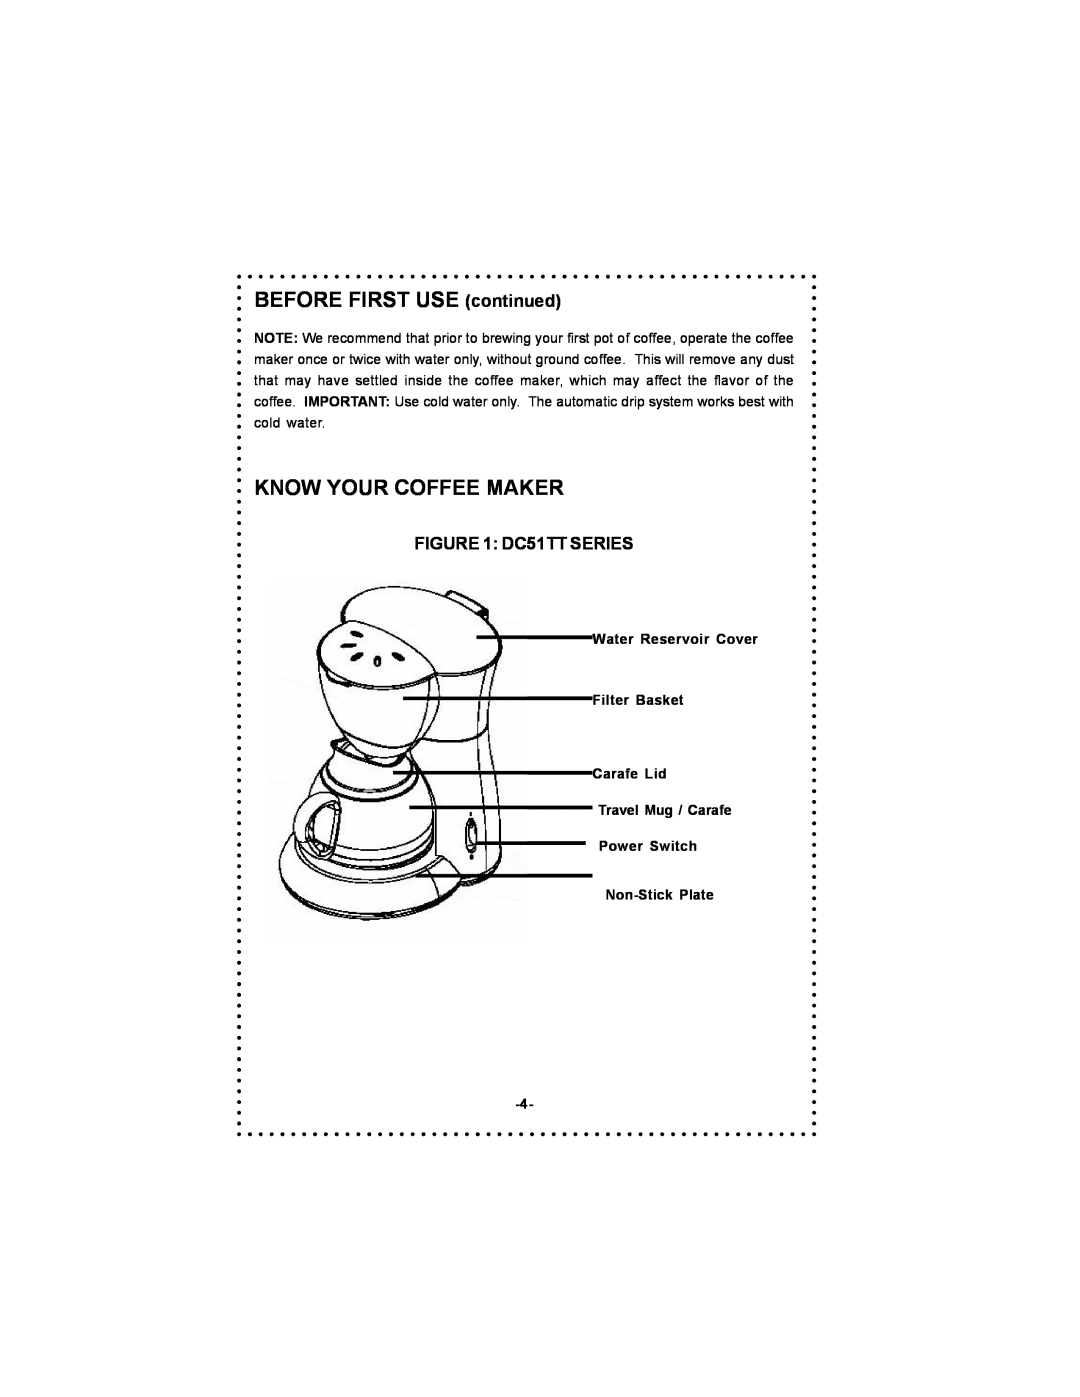 DeLonghi Coffee Makers instruction manual BEFORE FIRST USE continued, Know Your Coffee Maker, DC51TT SERIES 